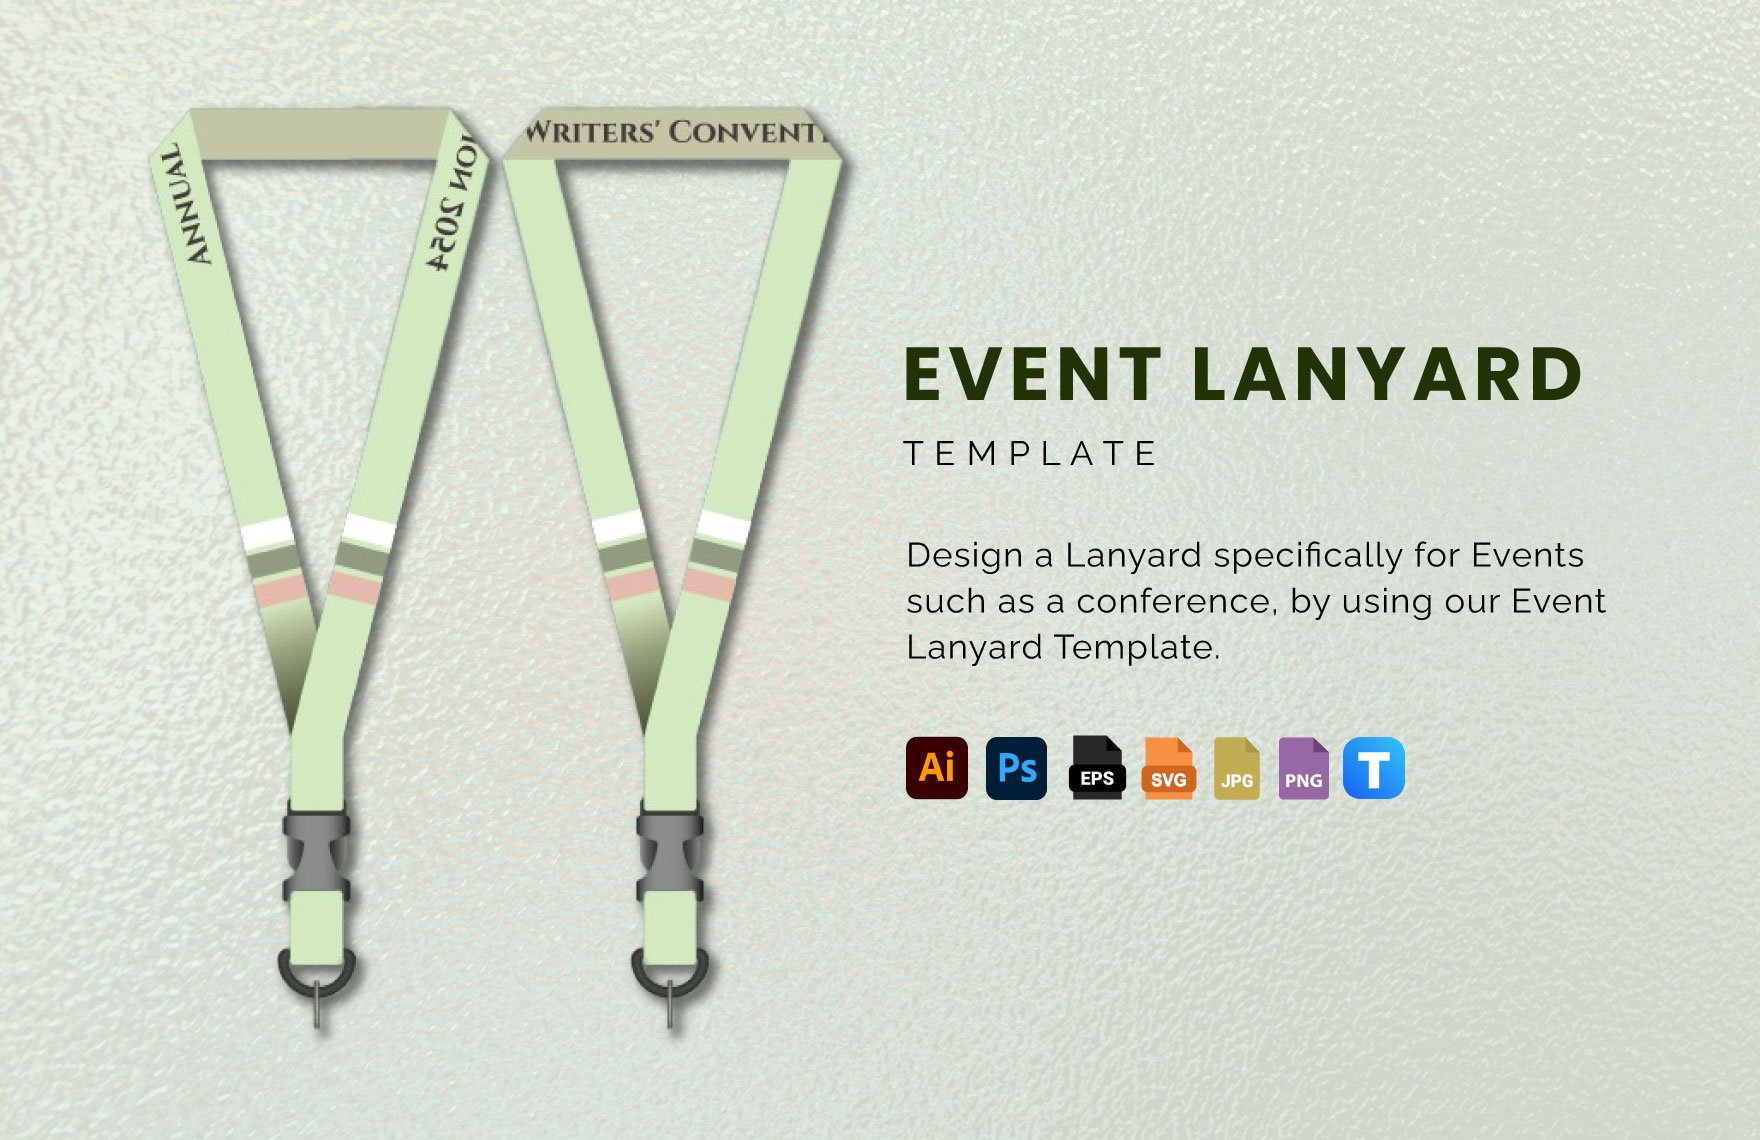 Event Lanyard Template